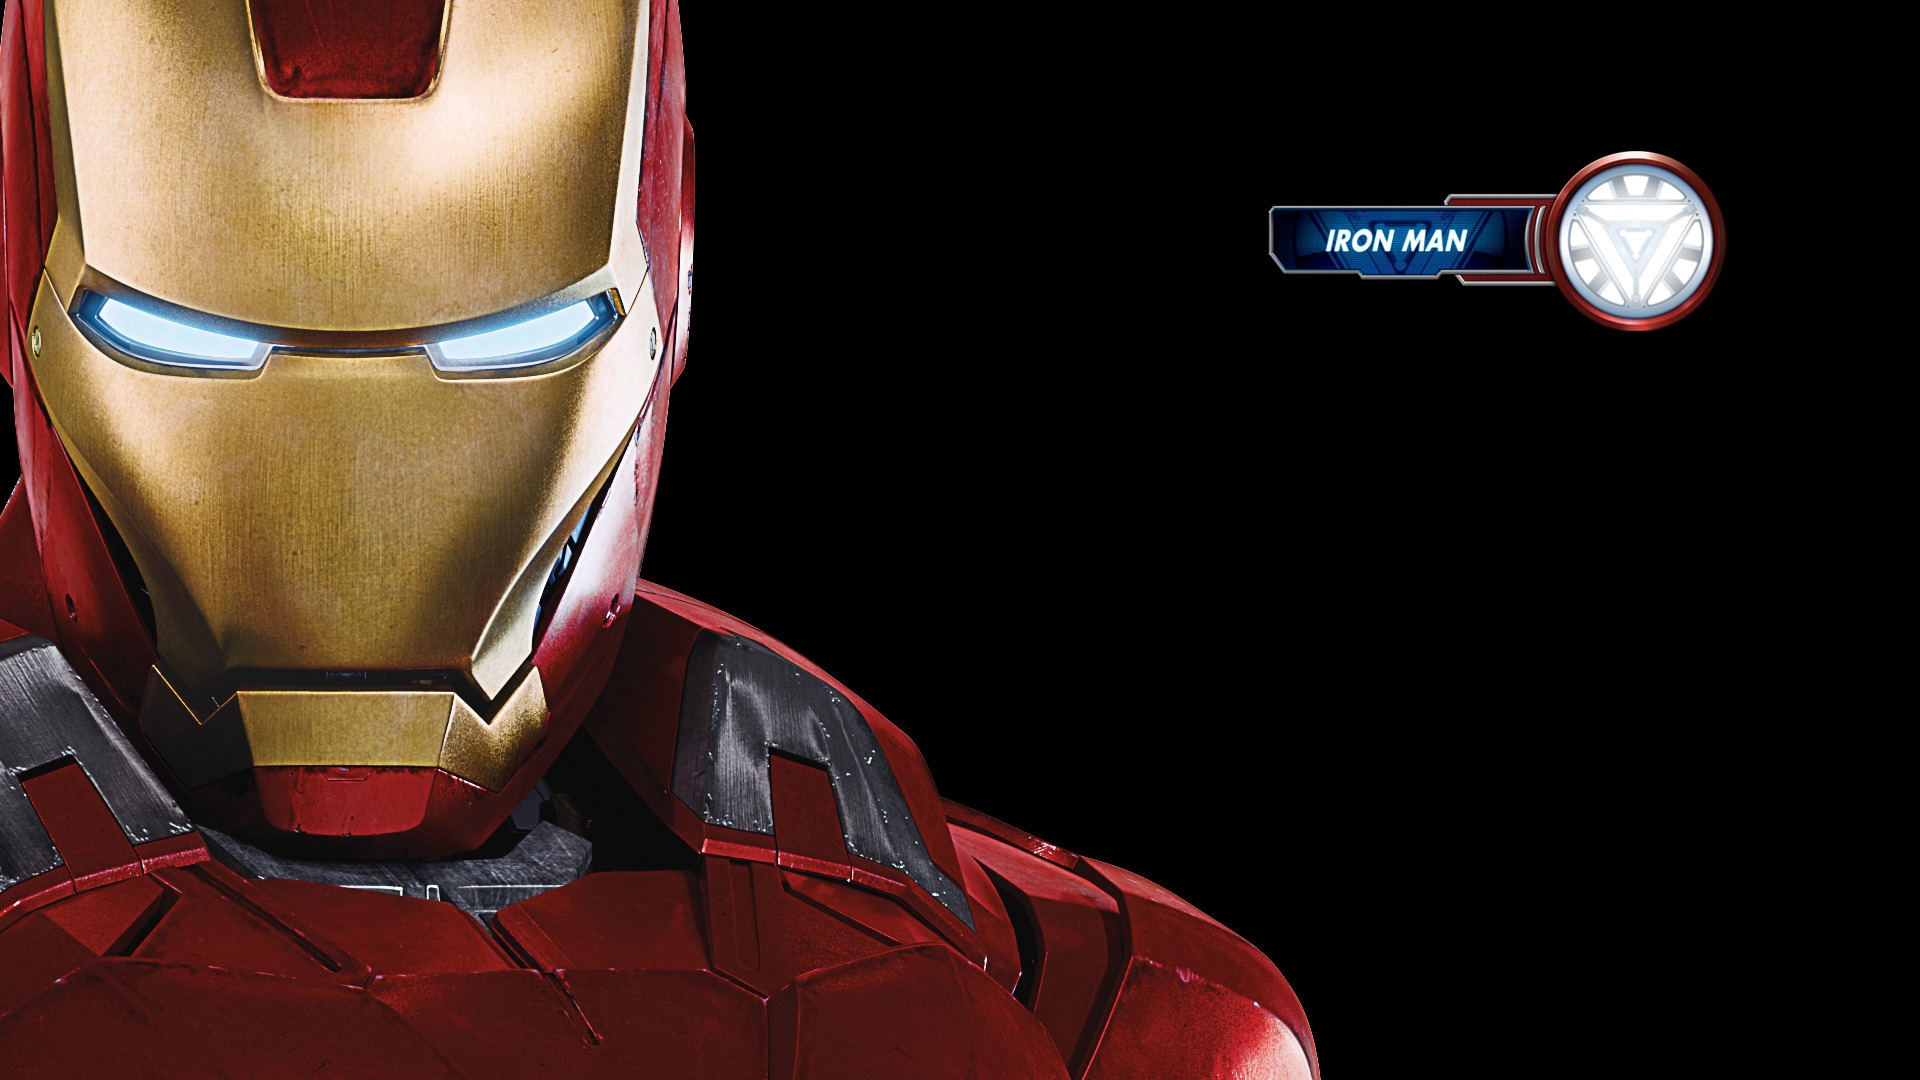 The Avengers Iron Man for 1920 x 1080 HDTV 1080p resolution